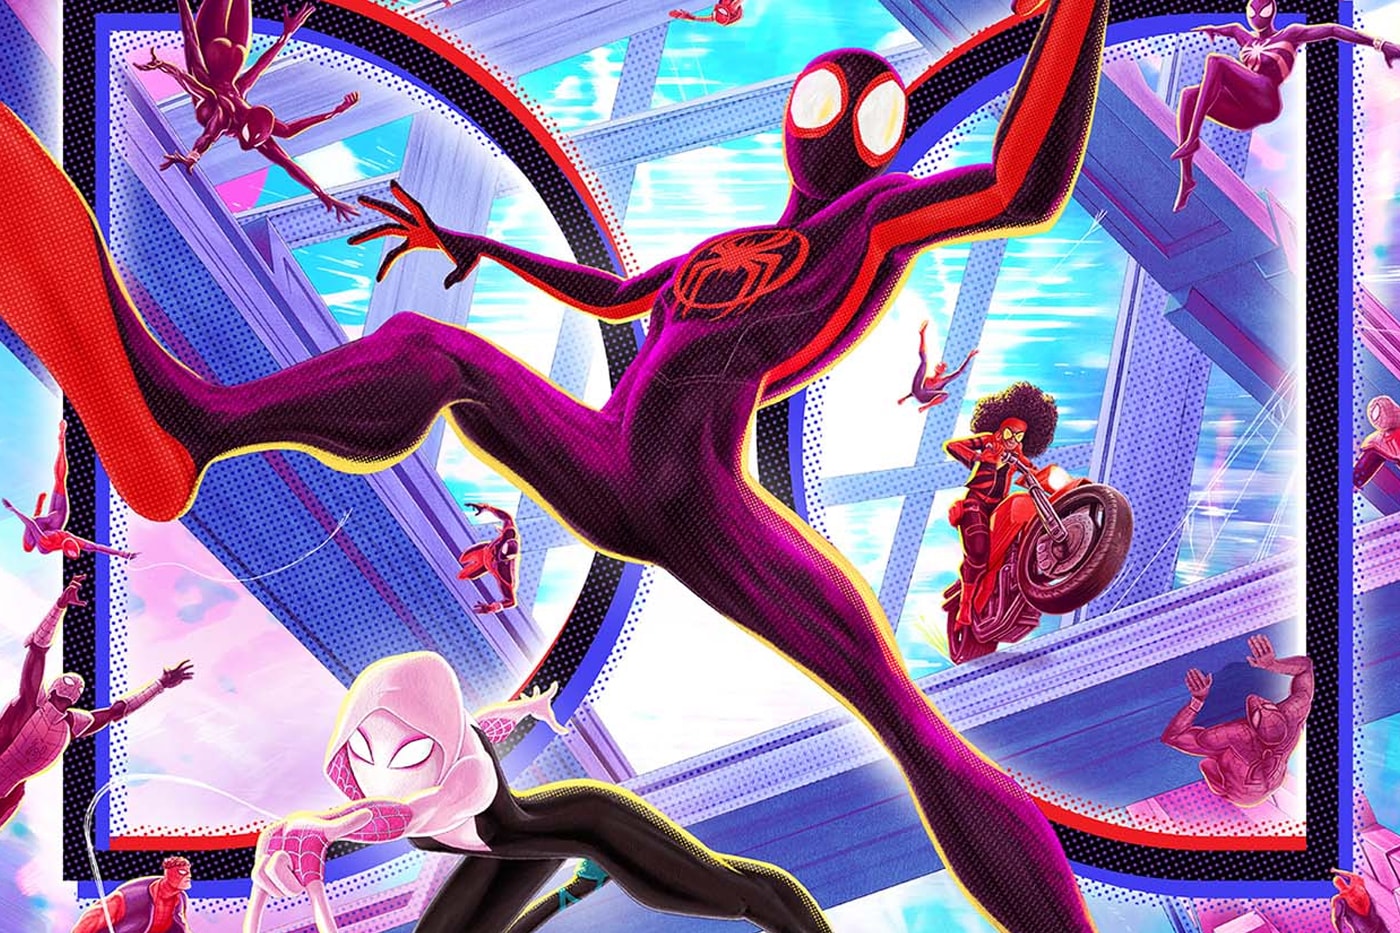 Spider-Man: Across the Spider-Verse to release a day early in